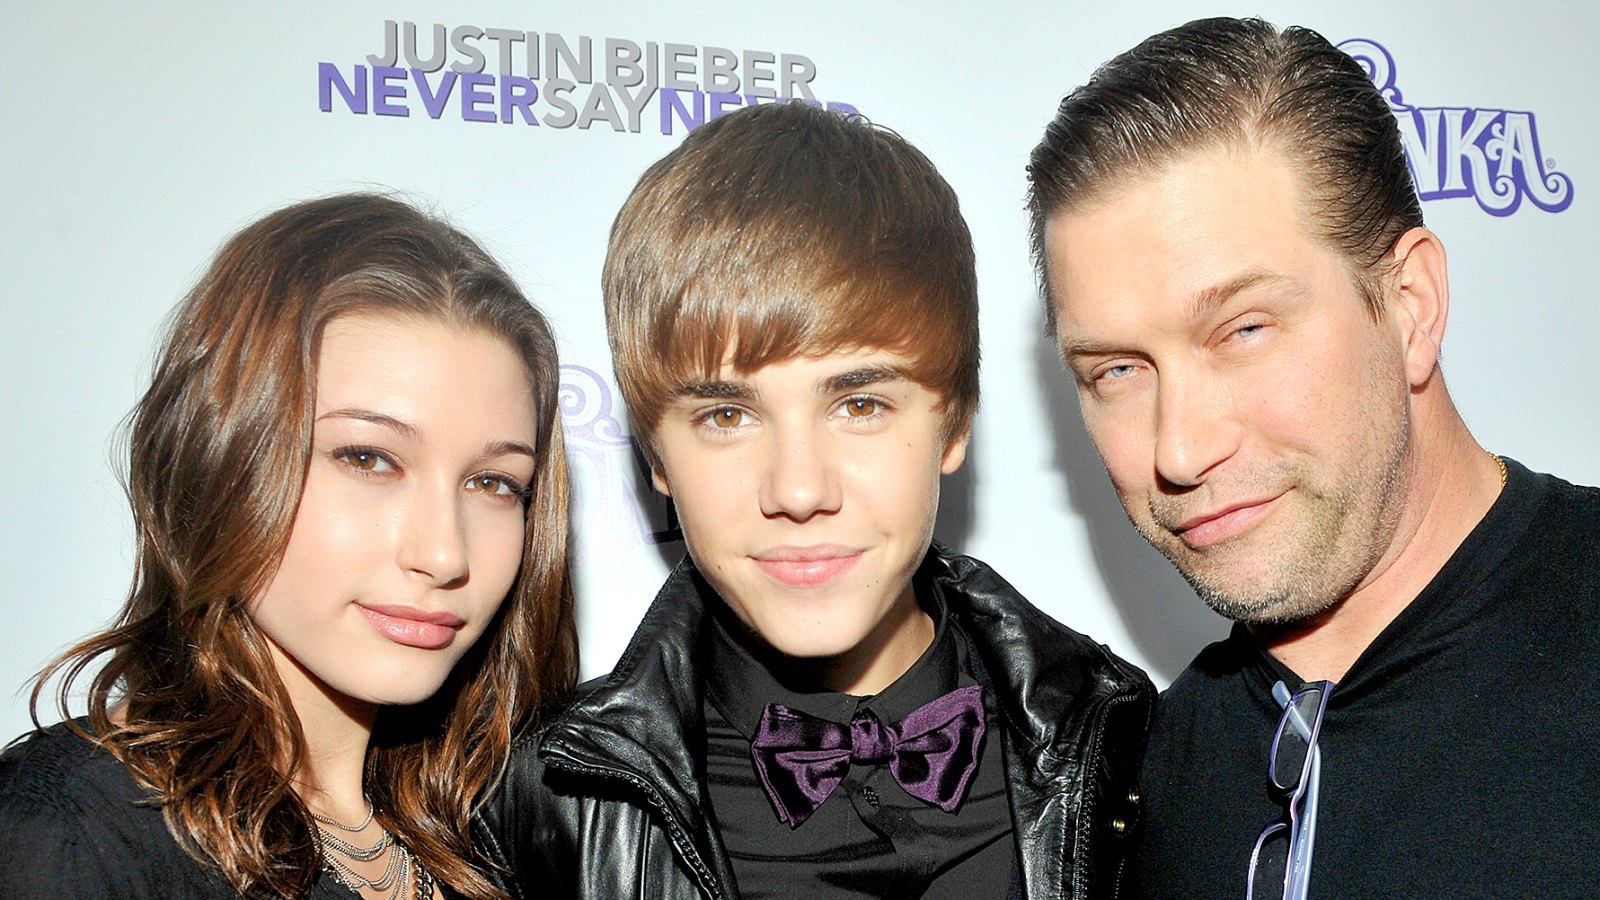 Justin Bieber was the center of attention Steven Baldwin and his daughter Haley at the New York City premiere of his 3-D film